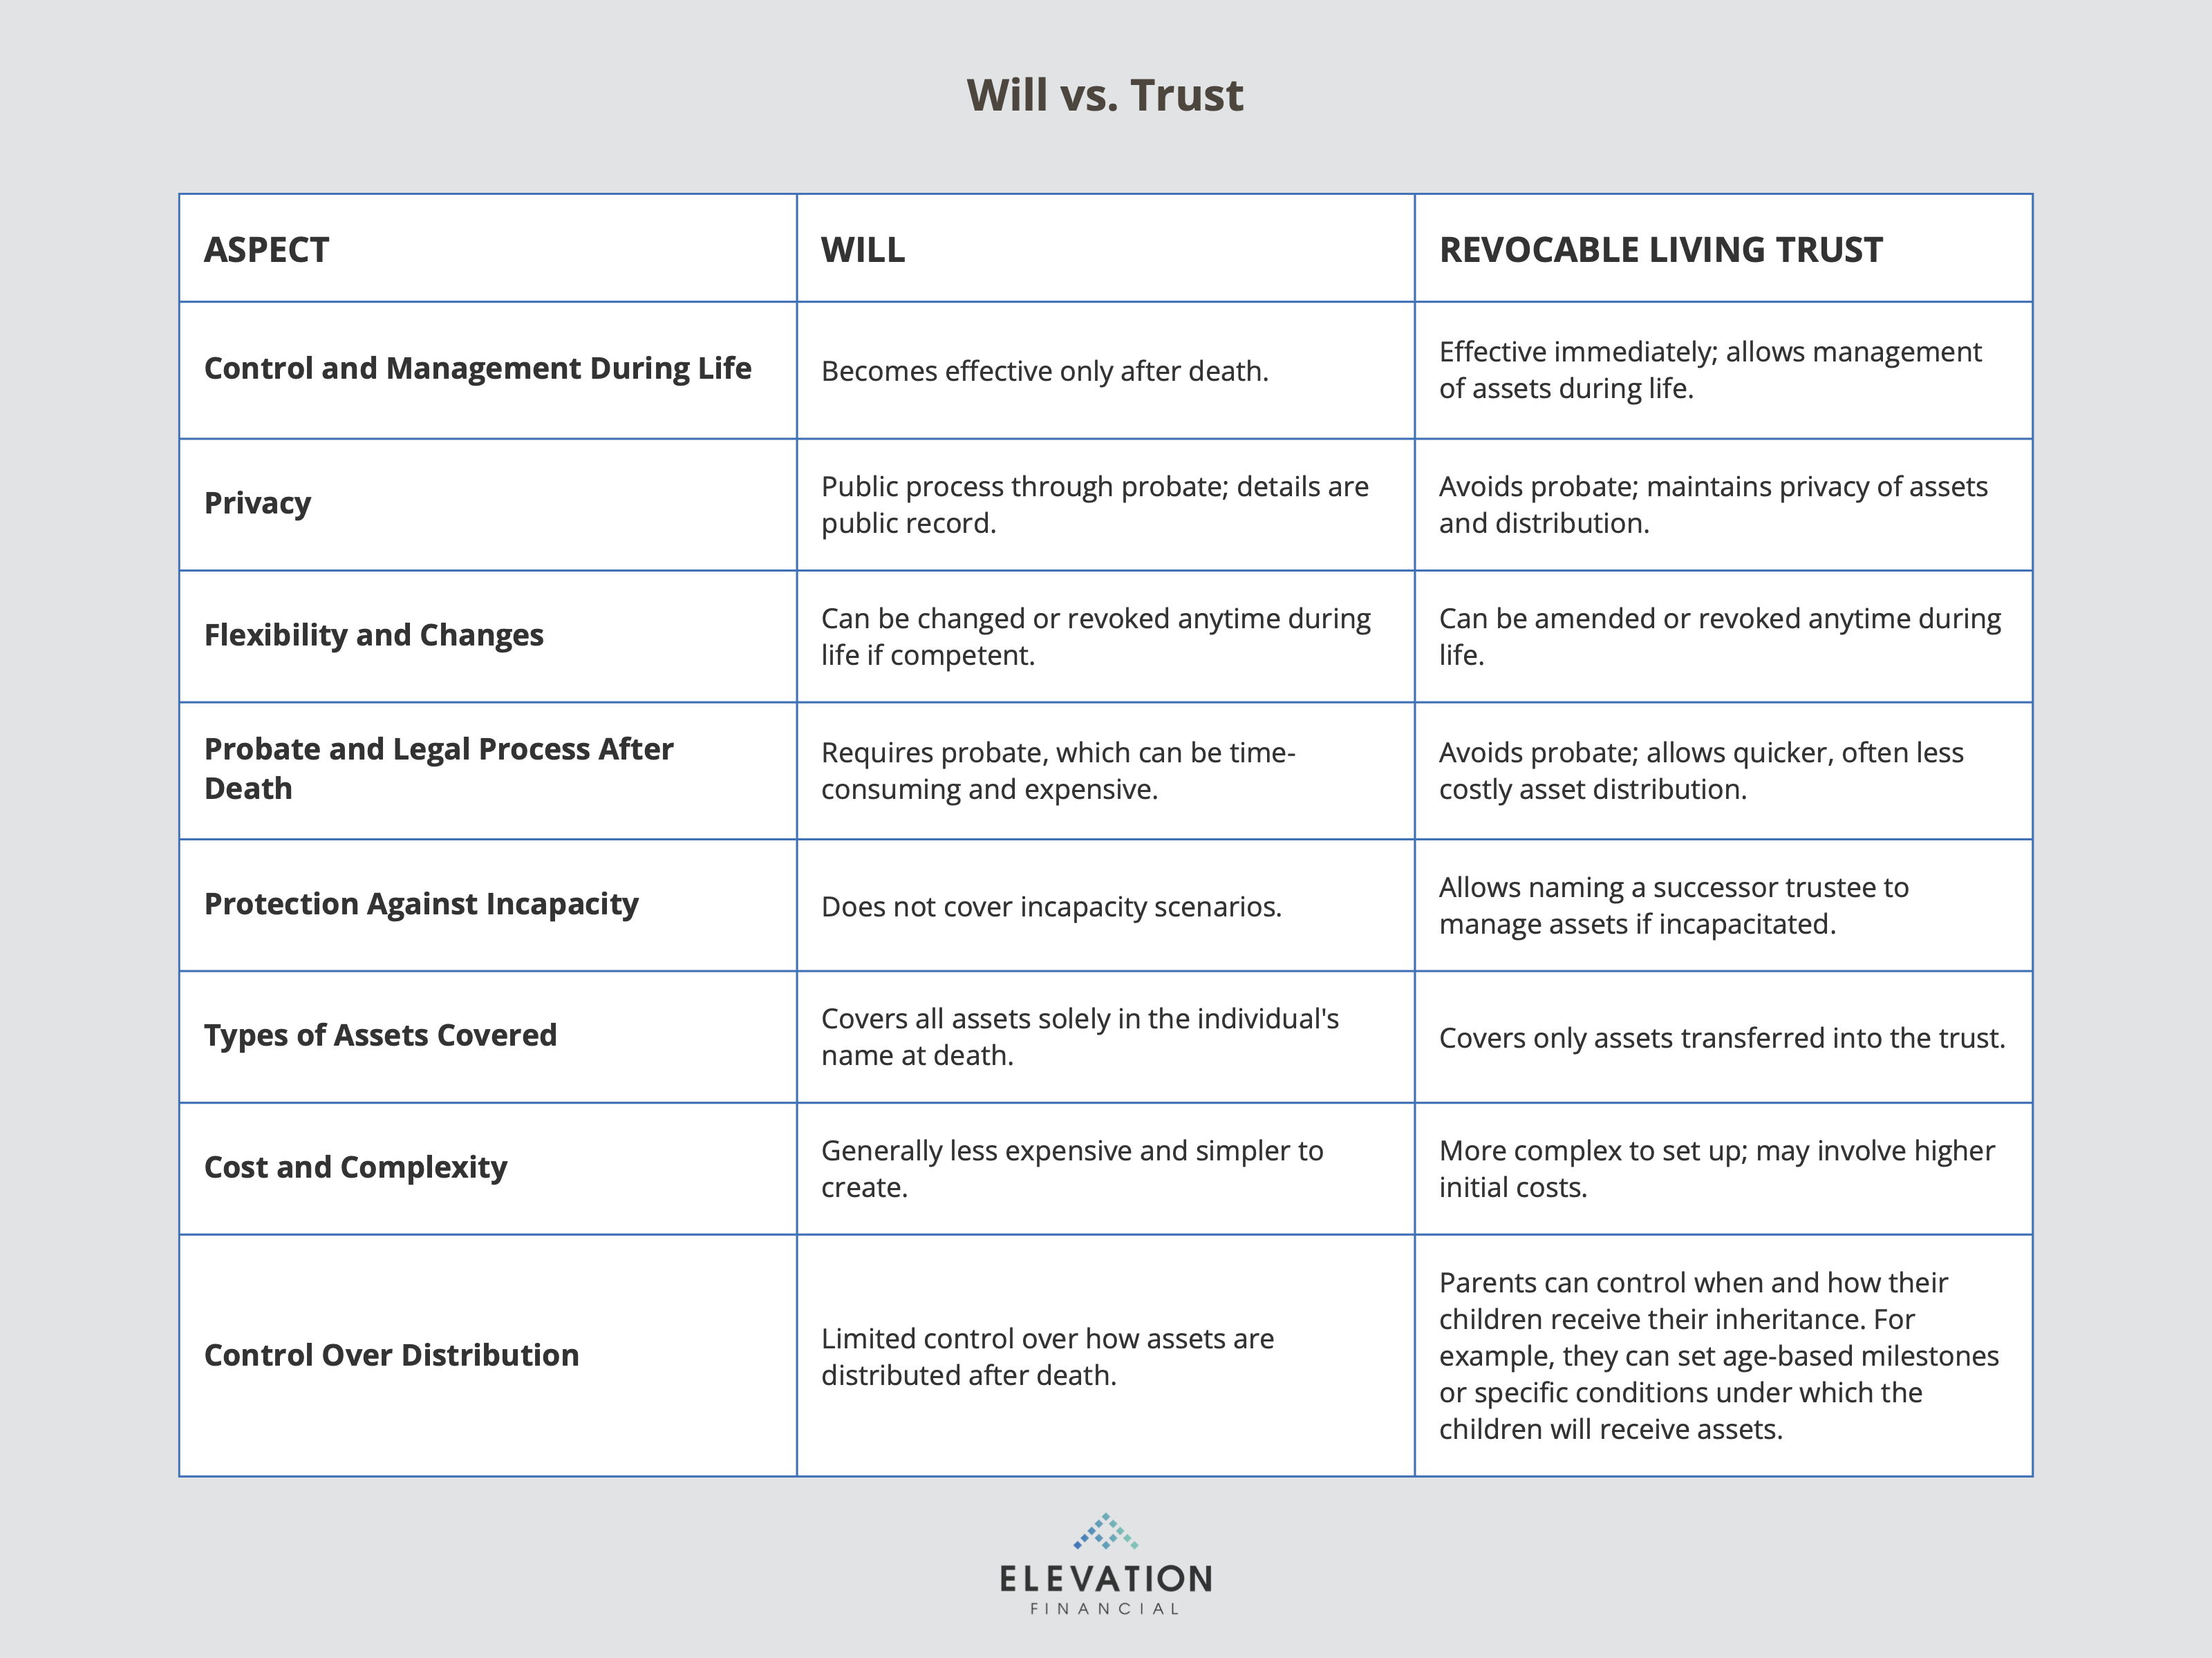 A chart showing the key differences between a will and a revocable living trust